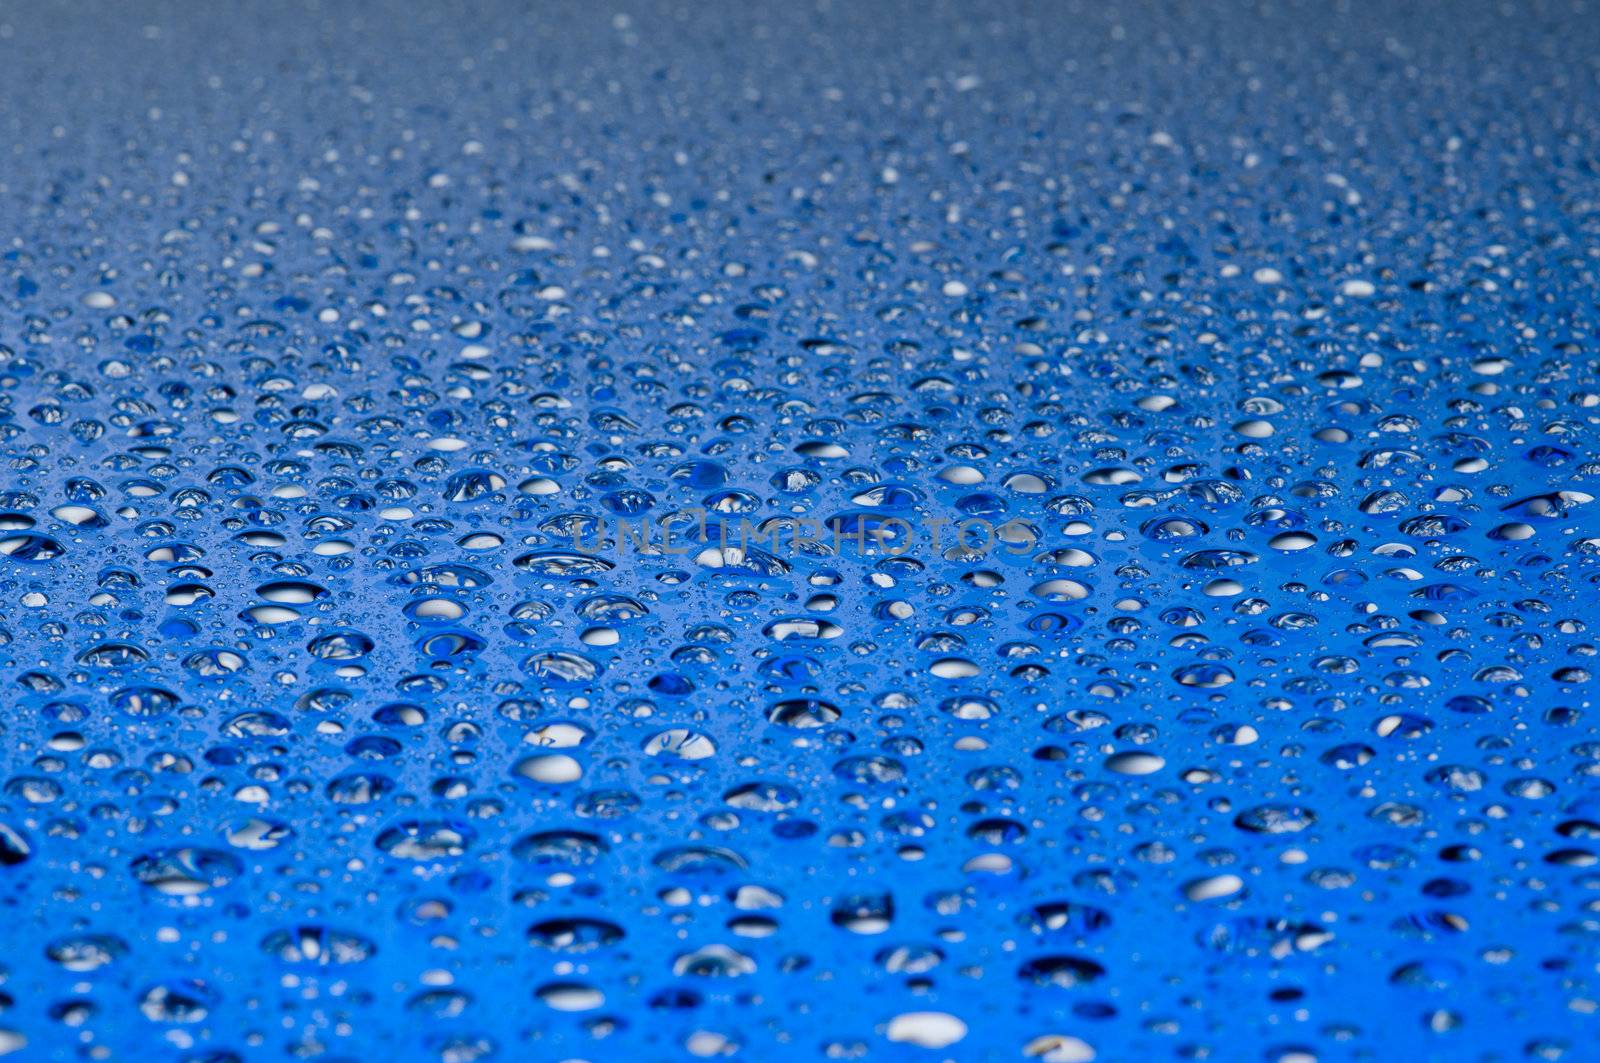 Water drops on a shiny surface in blue